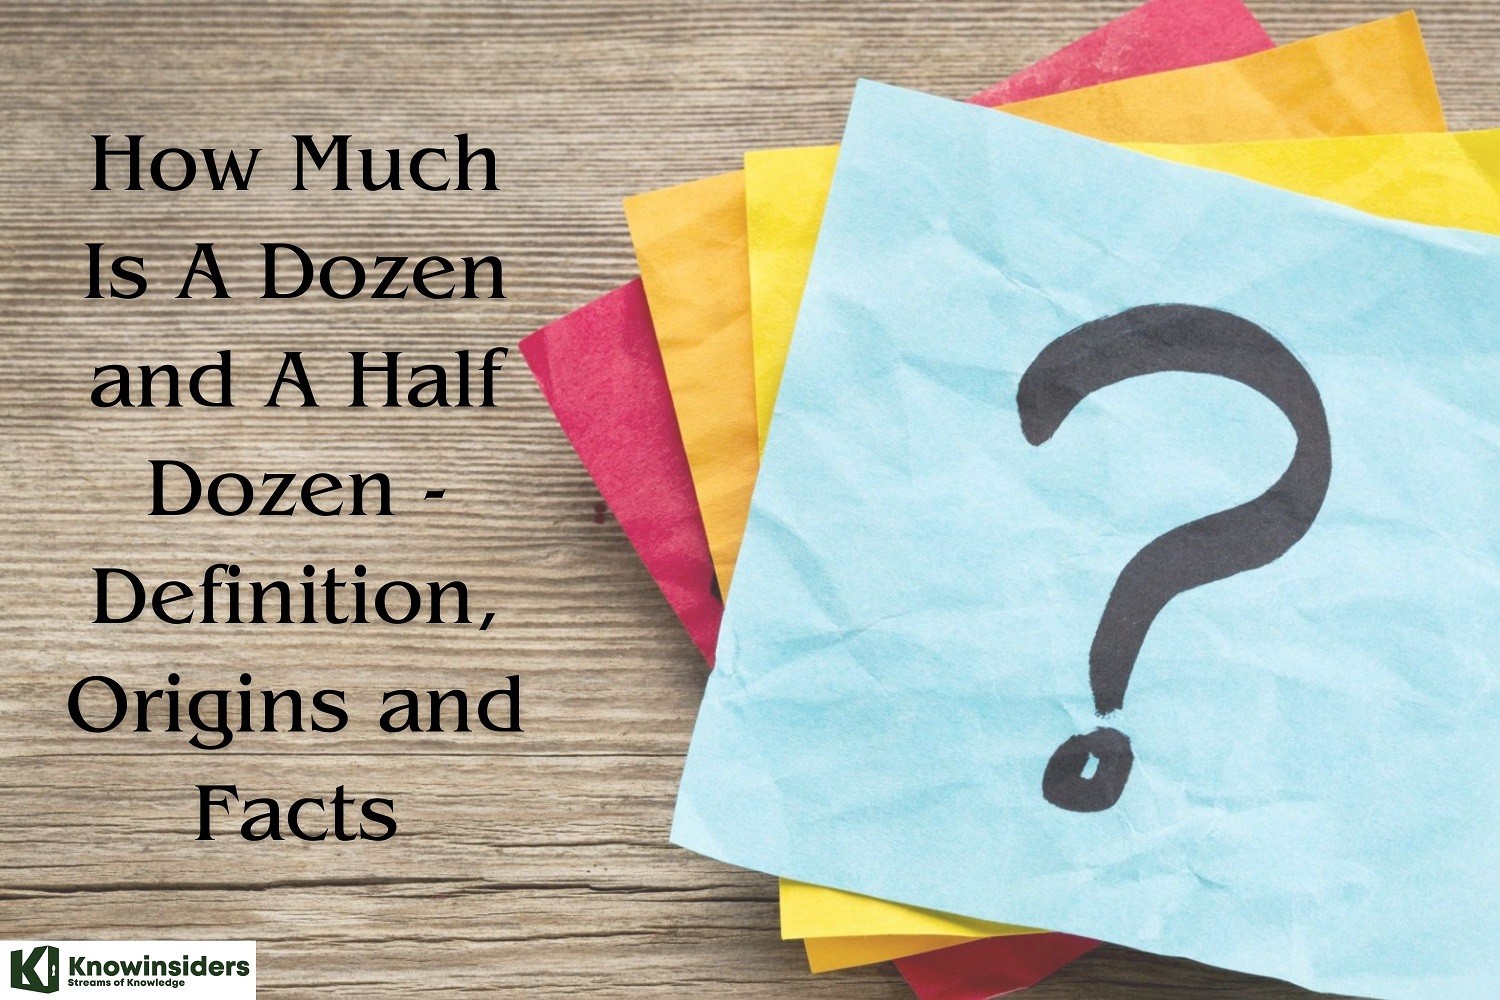 How Much Is A Dozen and A Half Dozen - Definition, Origins and Facts